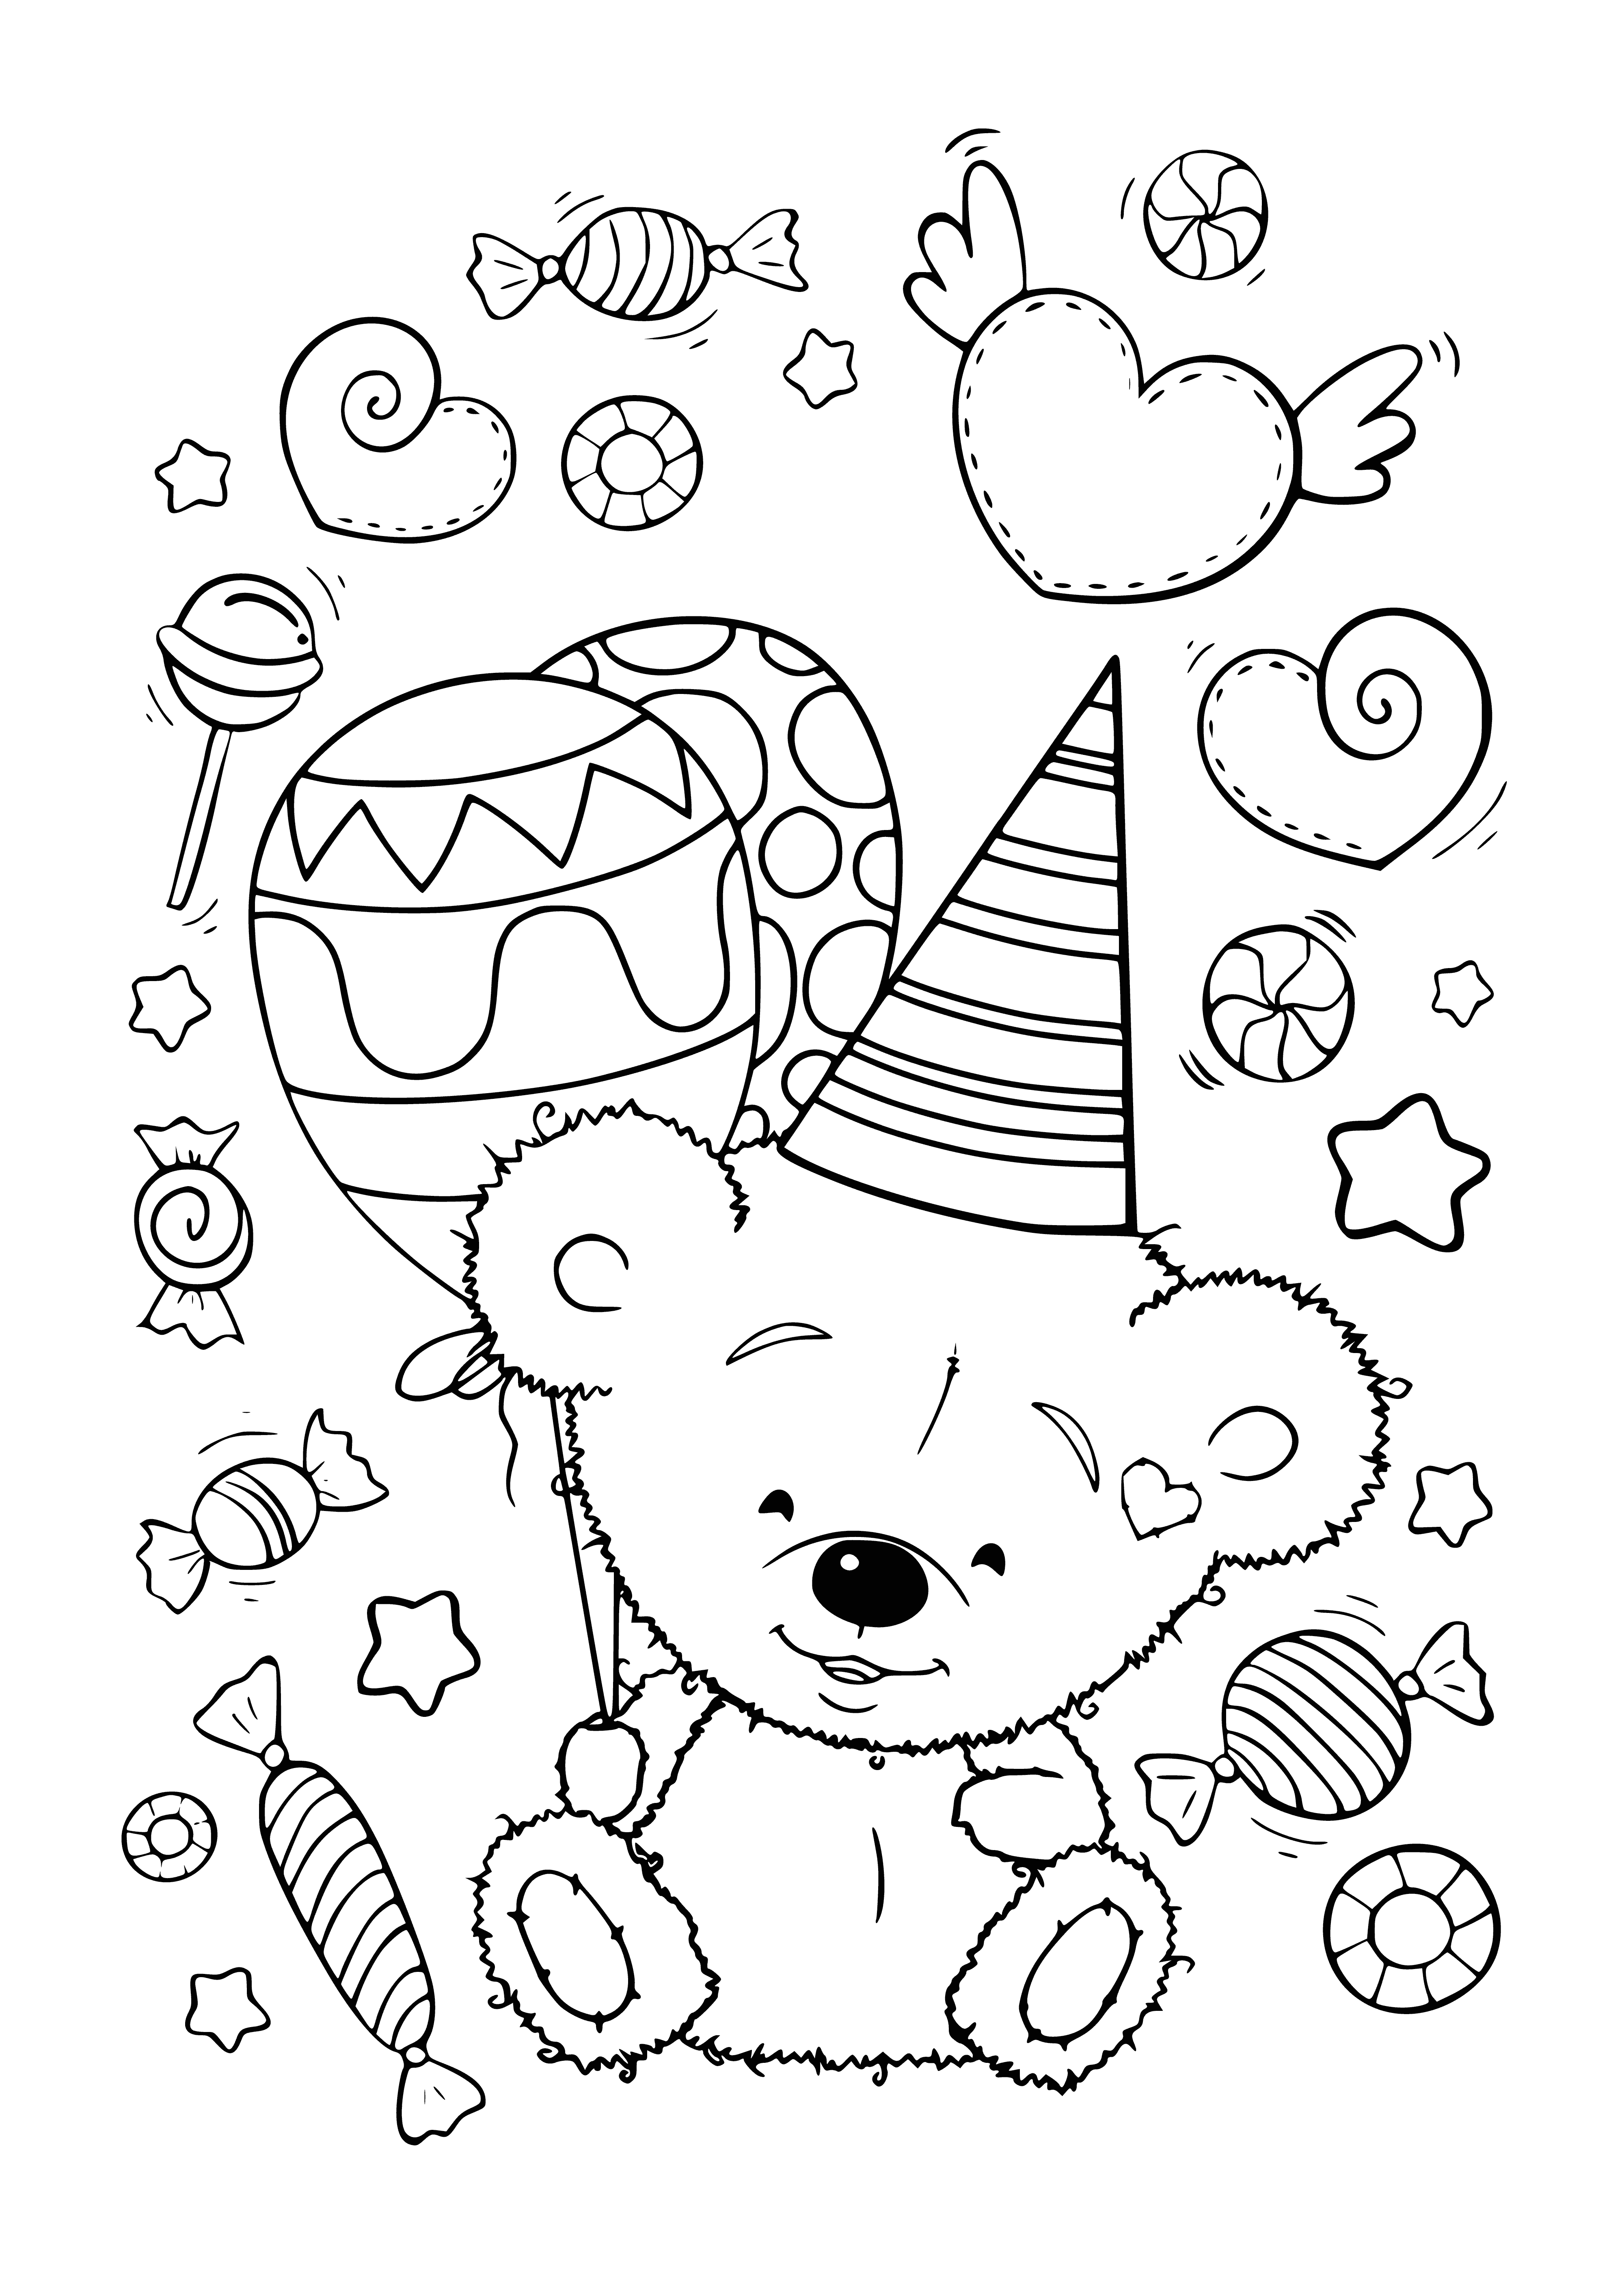 Teddy bear at the holiday coloring page